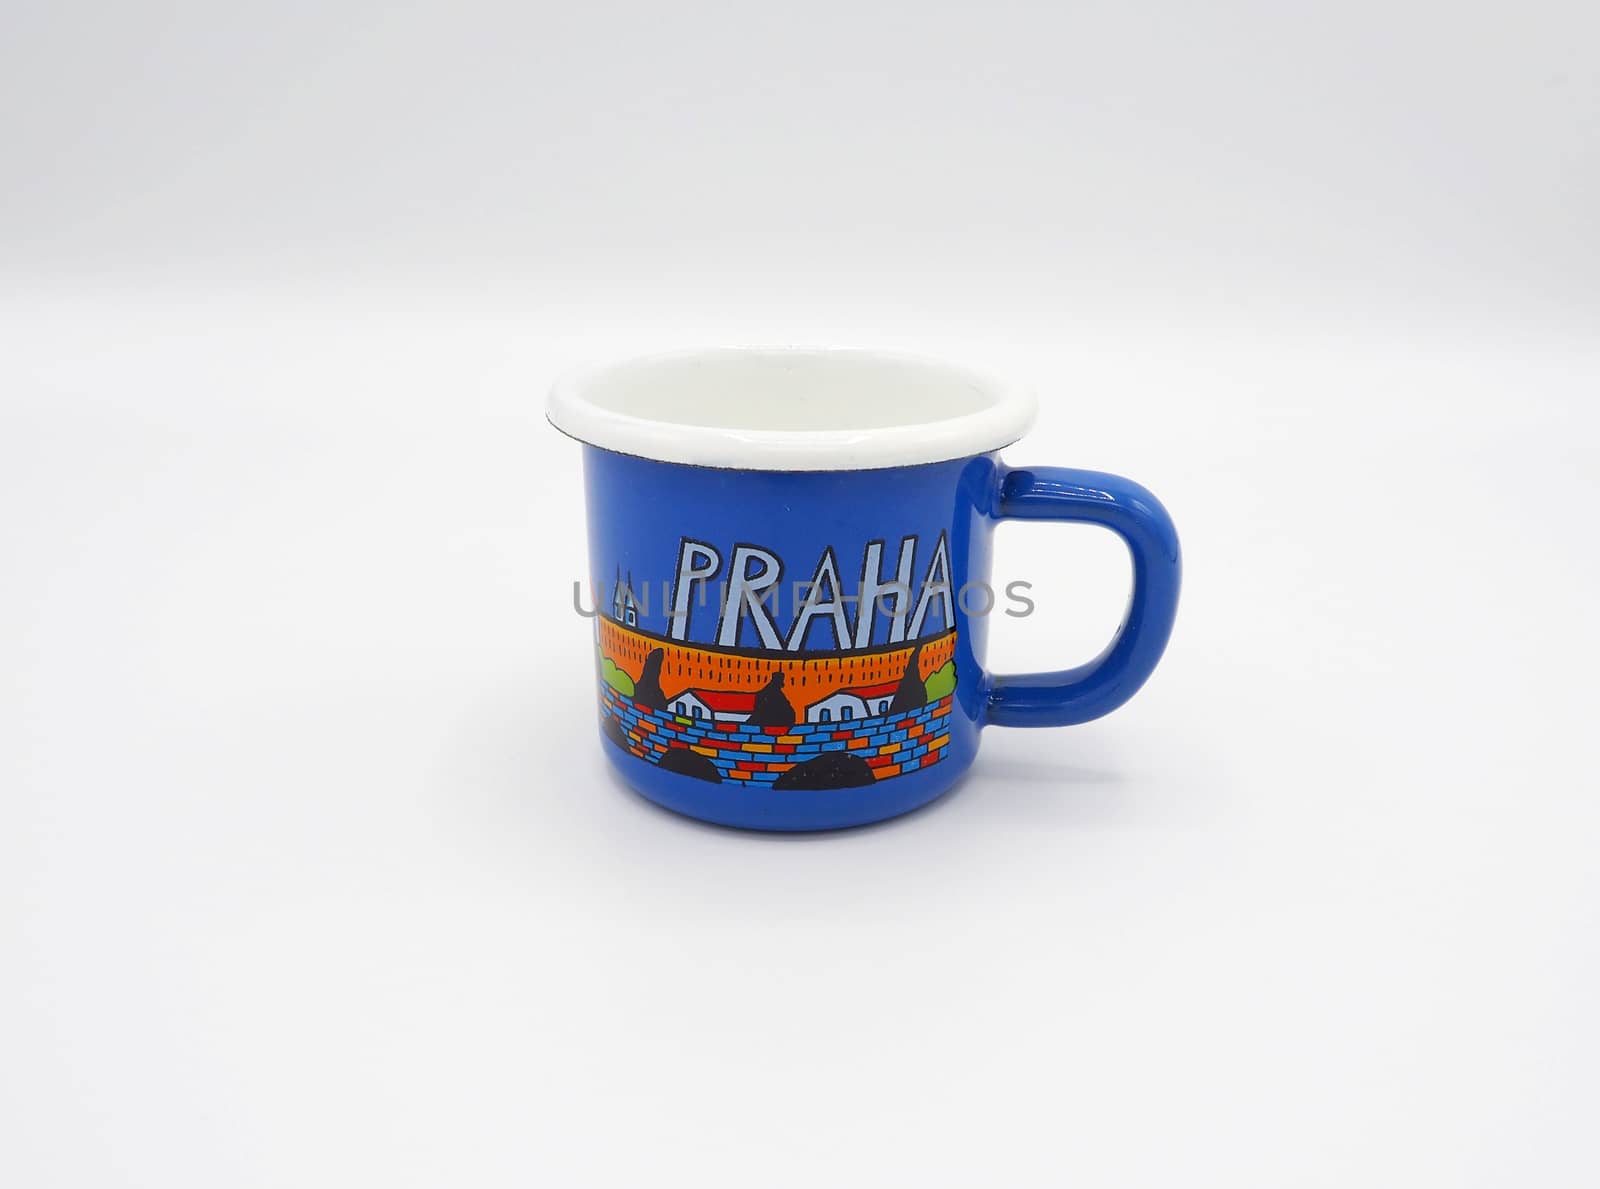 Small tiny and blue colour with hand made art souvenir coffee cu by gnepphoto